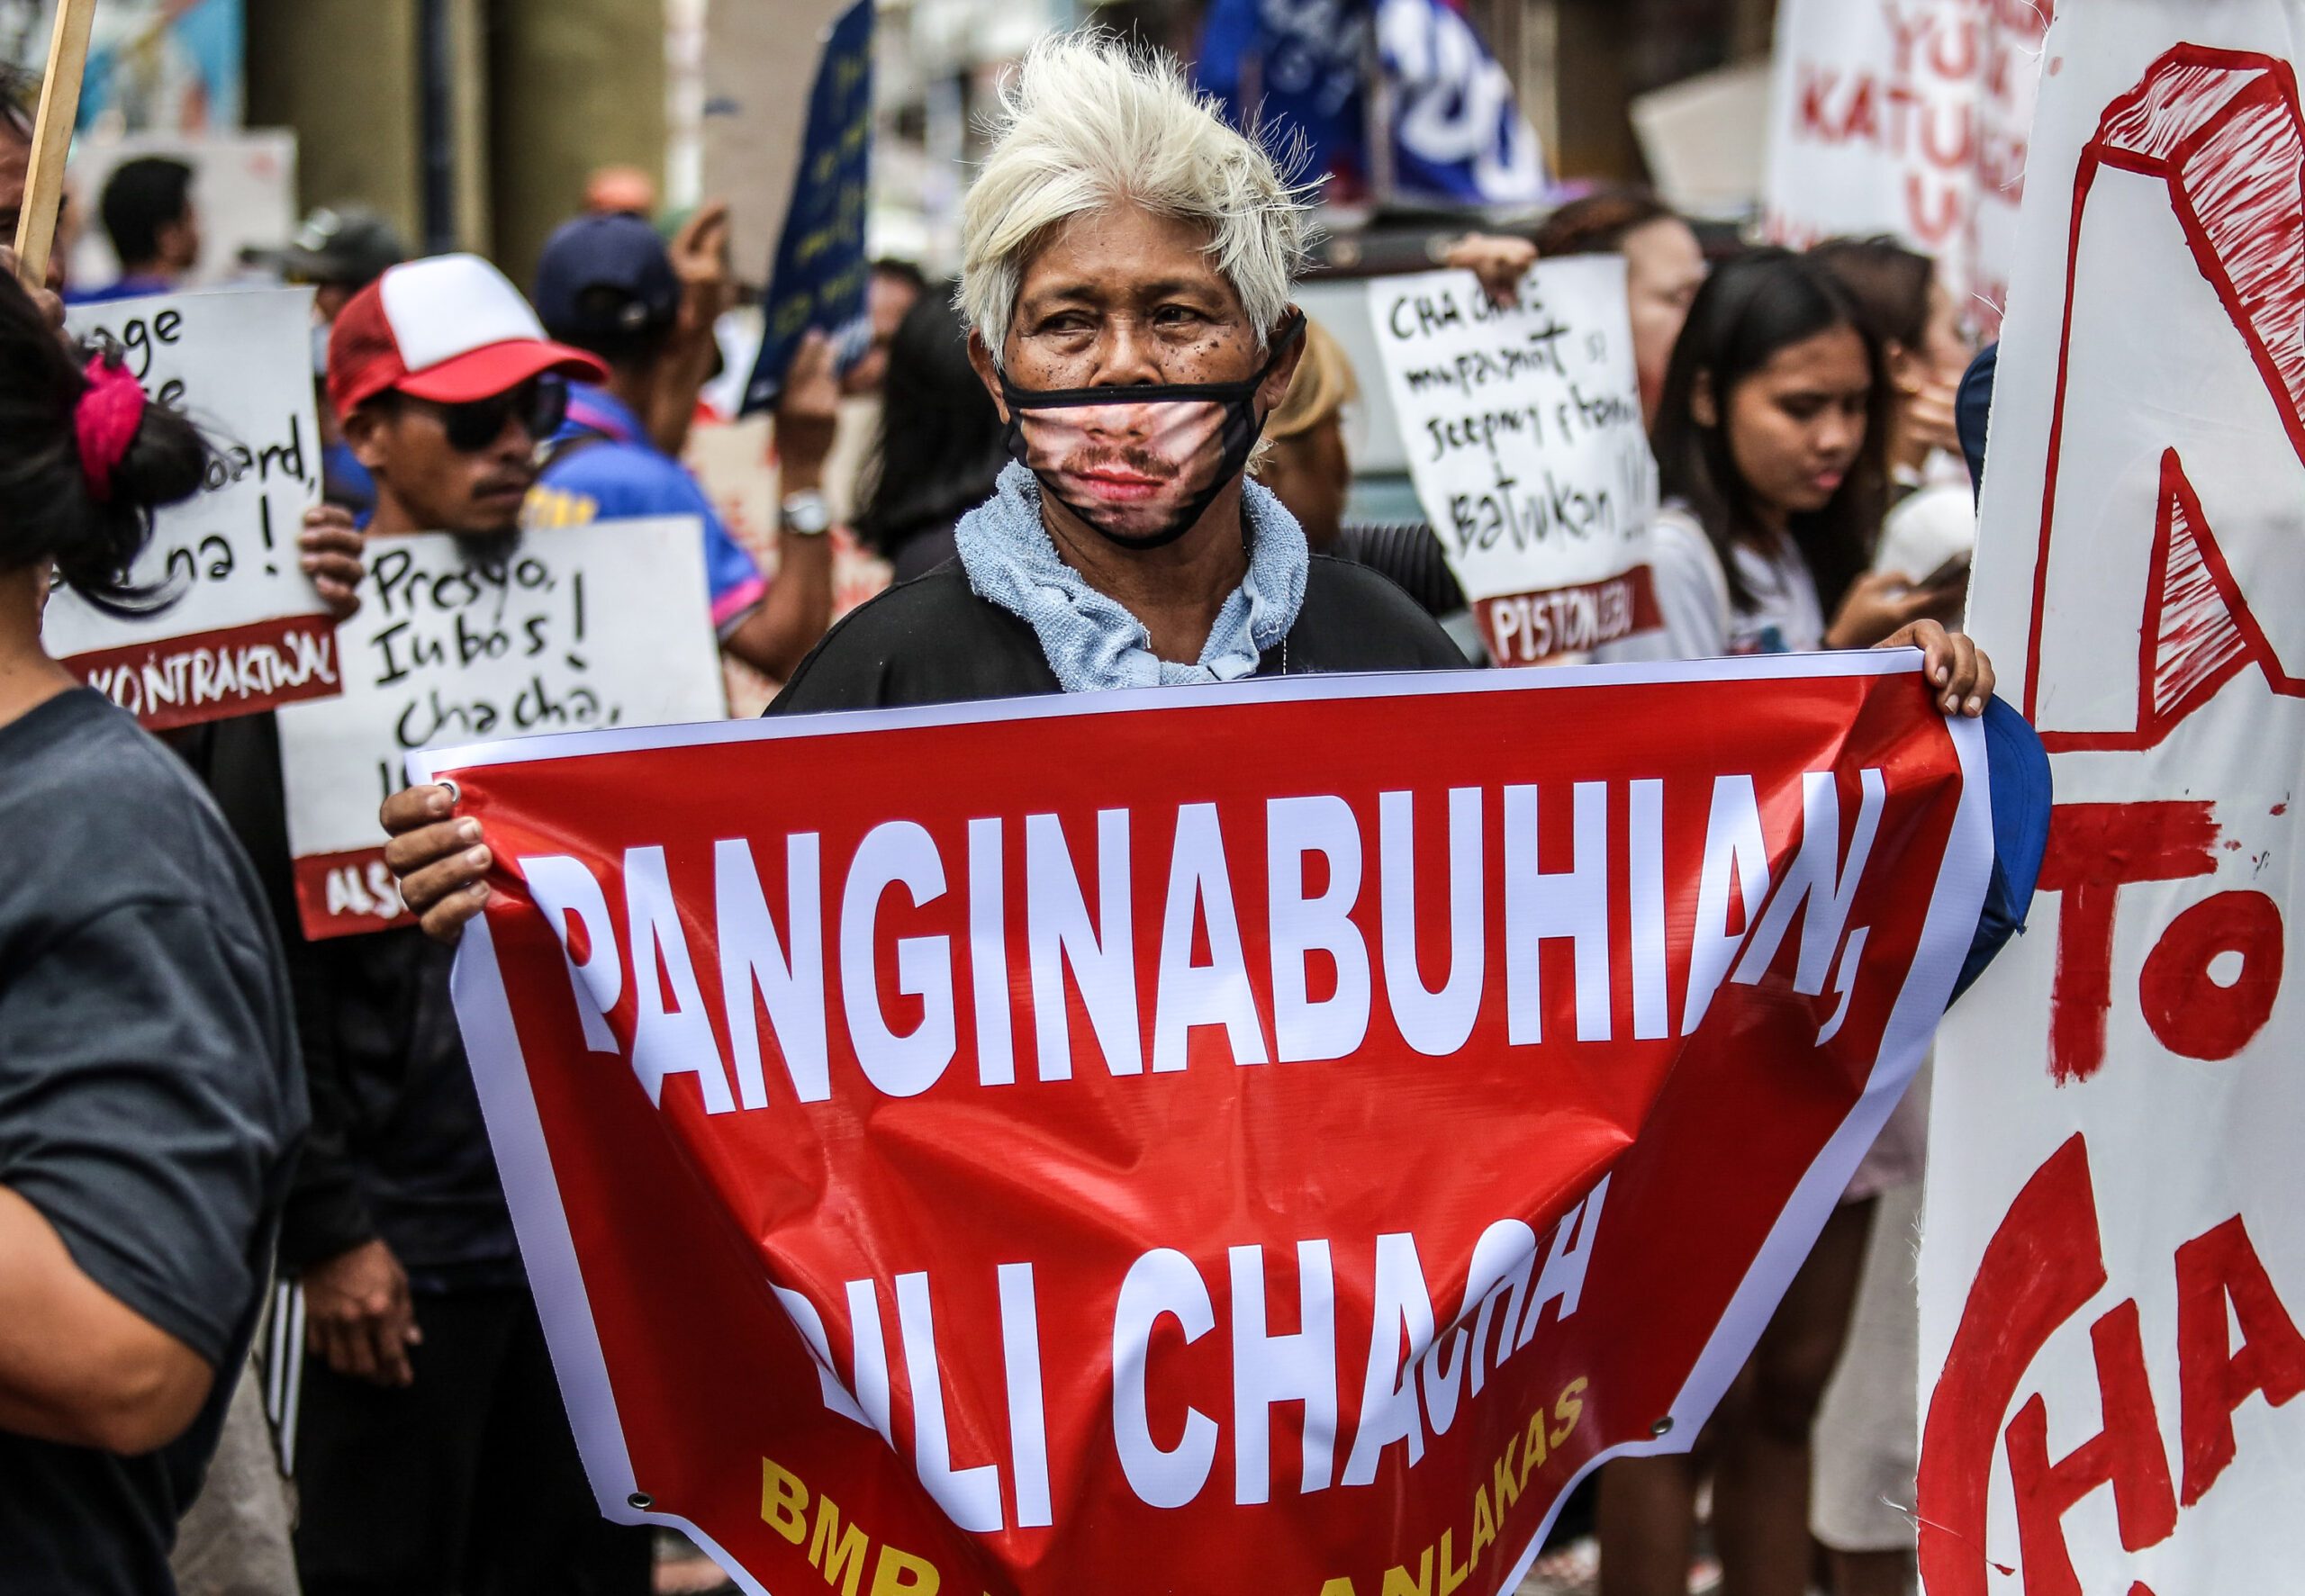 IN PHOTOS: On 38th People Power anniversary, groups oppose charter change